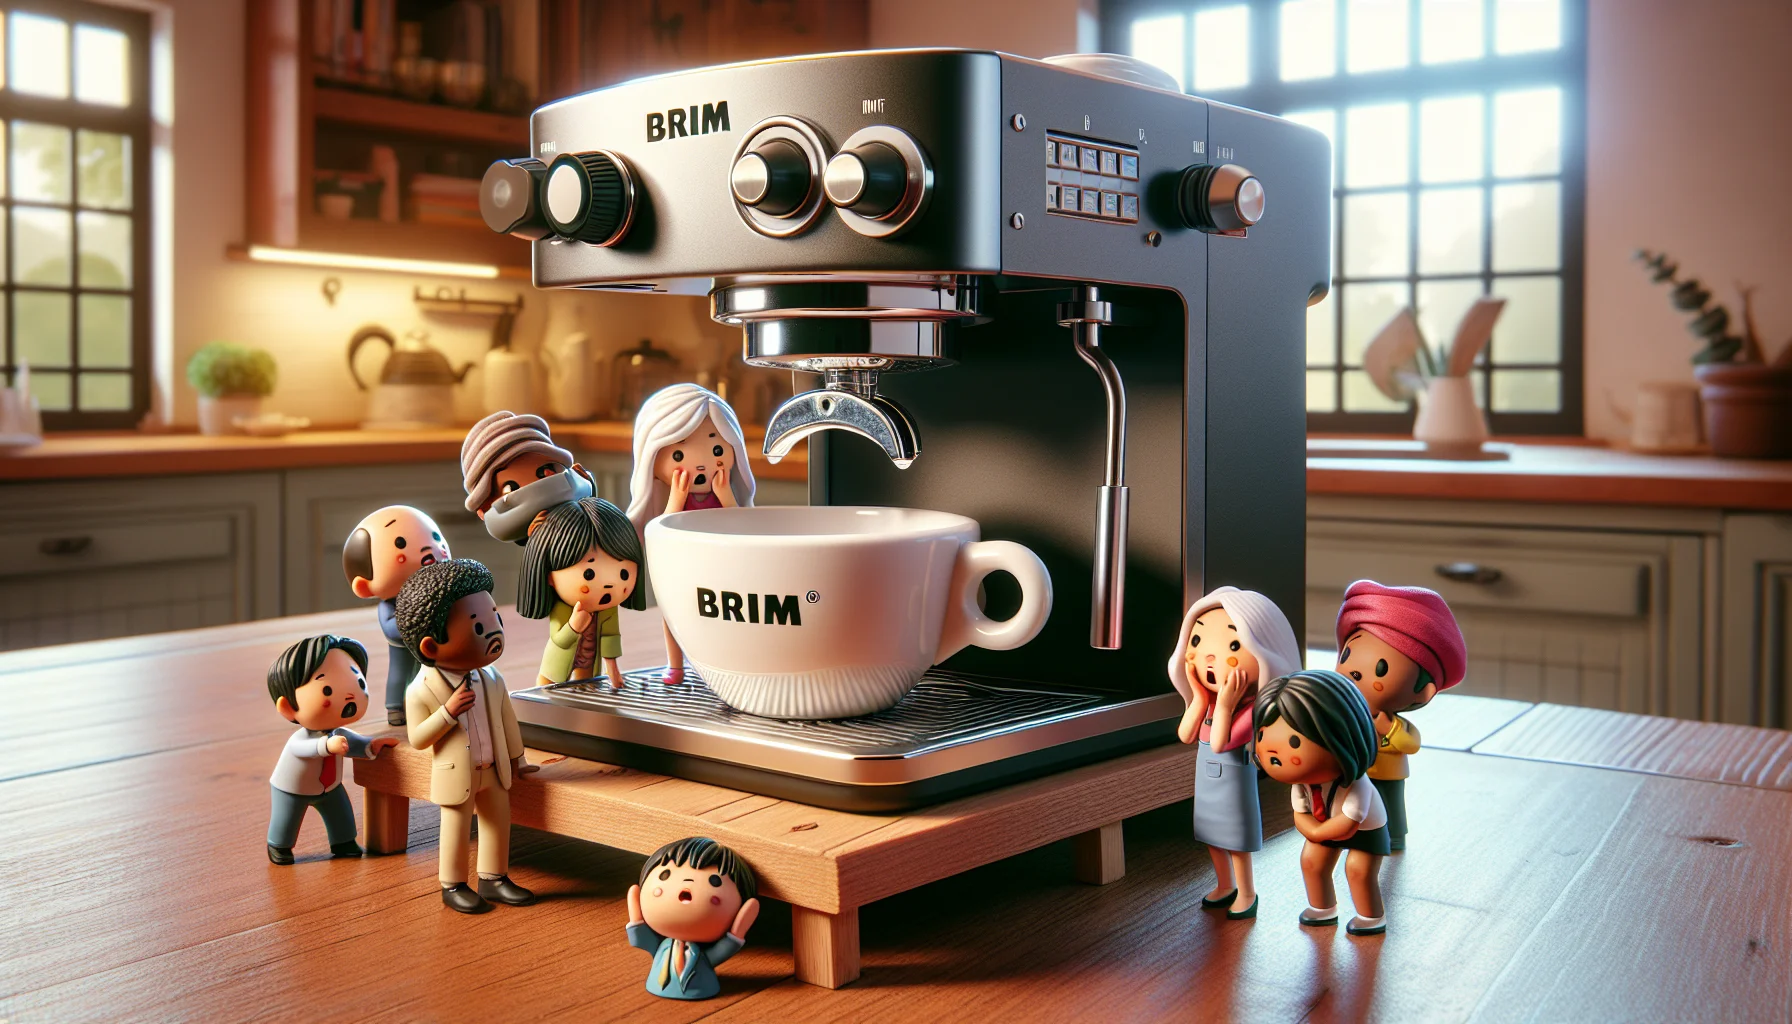 Create a lively and humorous image, showcasing a brim espresso machine upside down on a three-legged wooden table. To further entice people to enjoy, let's see a group of mini-cartoon characters try to figure out how to operate this gigantic machine for them, with comic expressions of bewilderment. Some characters are South Asian women, some are Caucasian men while others are black children. The setting is in a cozy kitchen, with sunlight streaming through a window and casting a warm glow on the espresso machine.